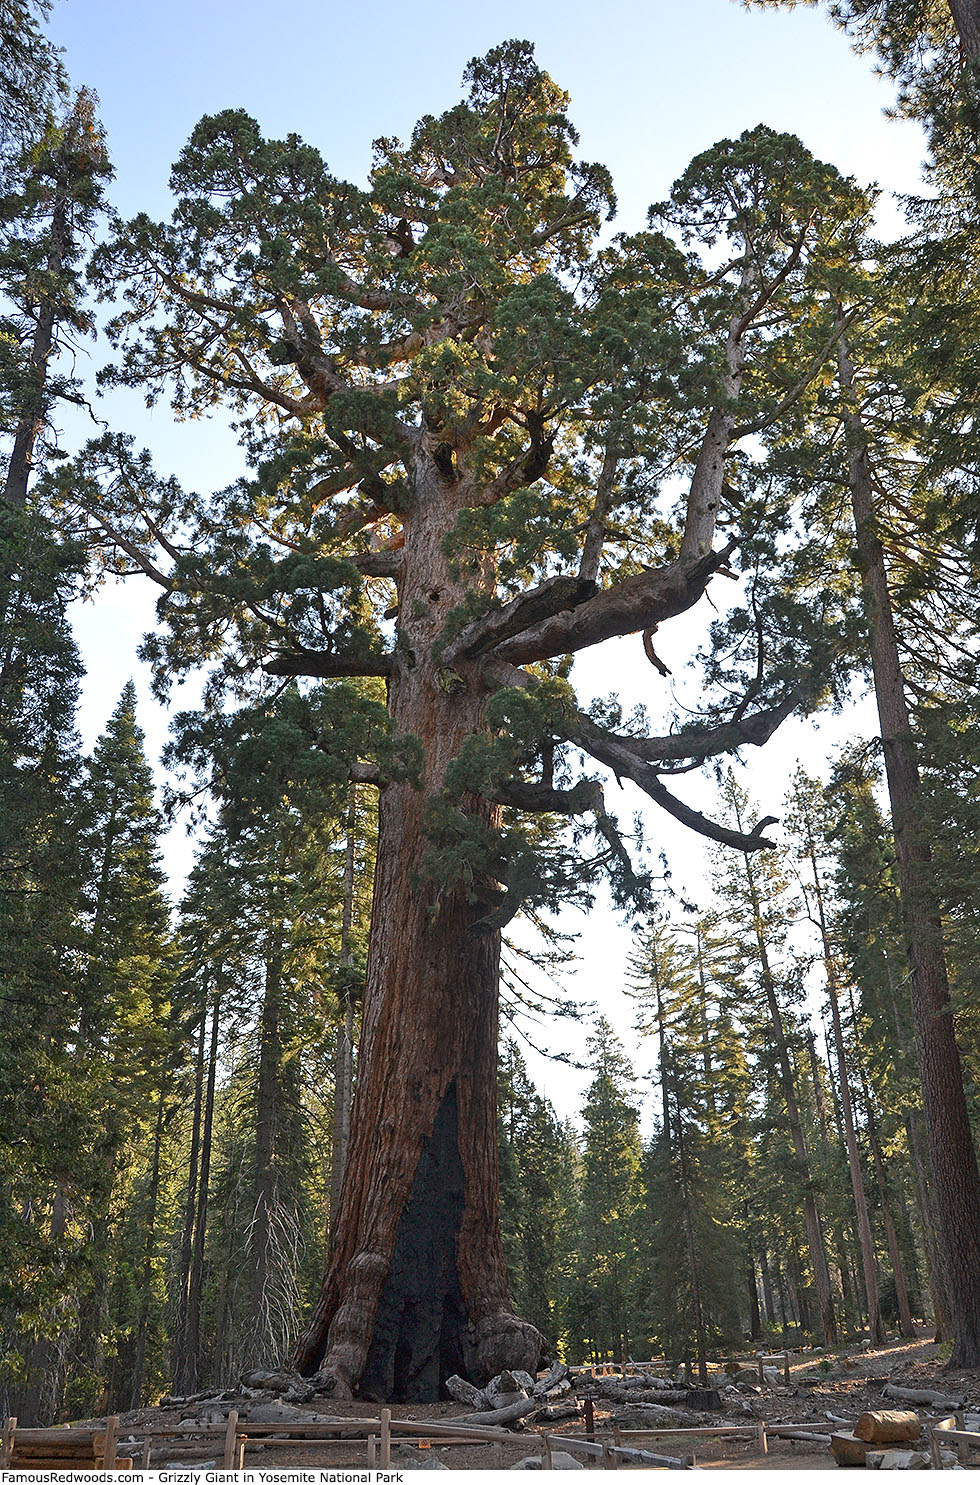 Yosemite National Park - Grizzly Giant Tree